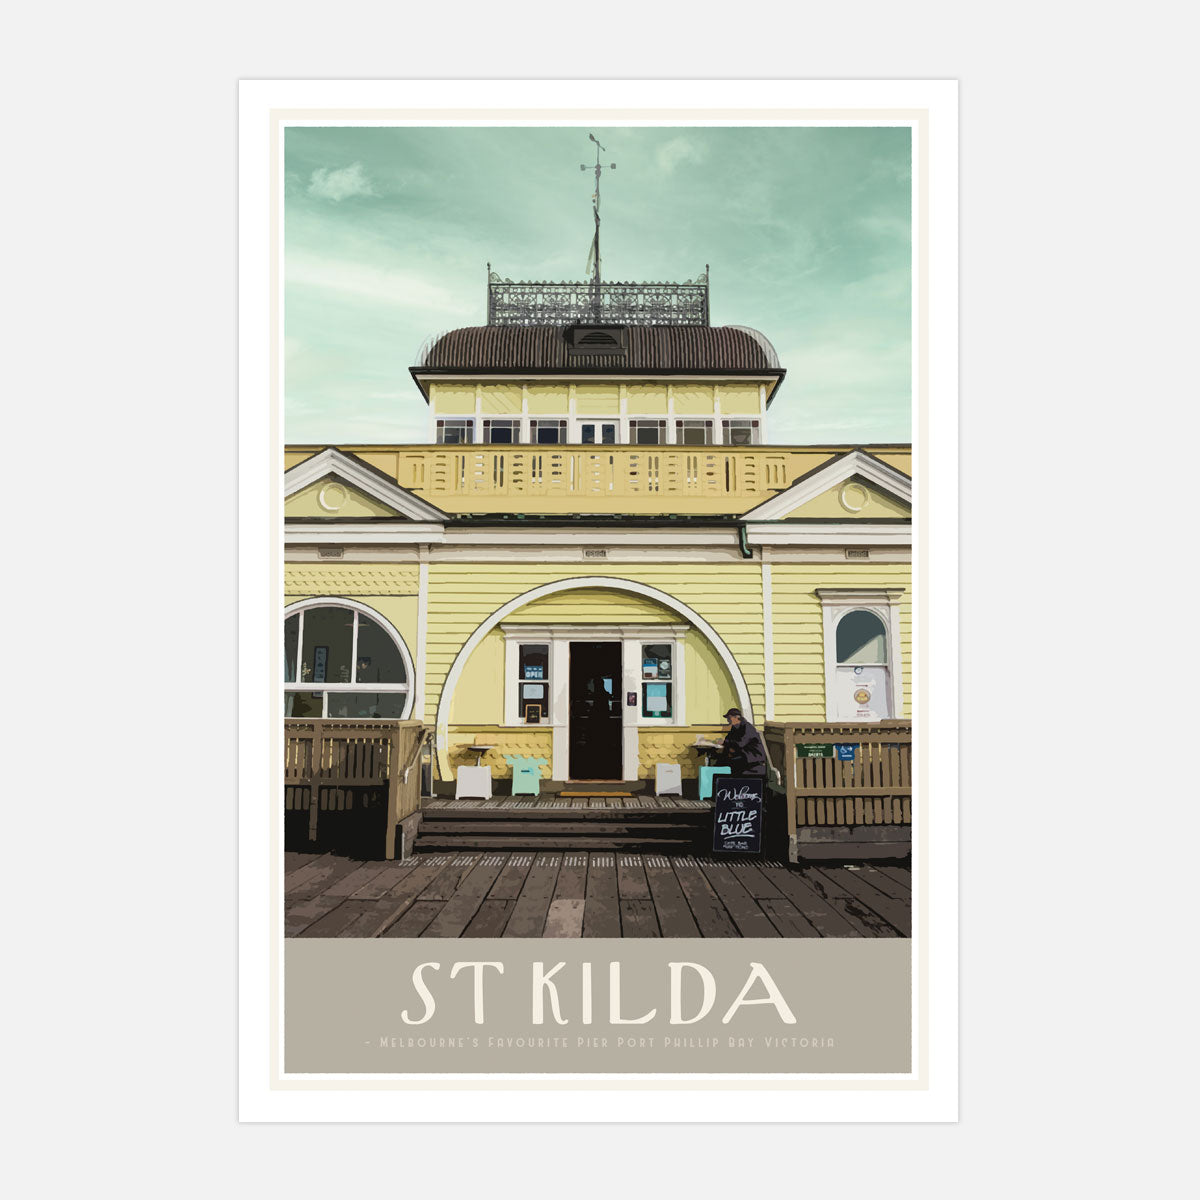 Melbourne poster, st kilda, retro vintage poster print from Places We Luv